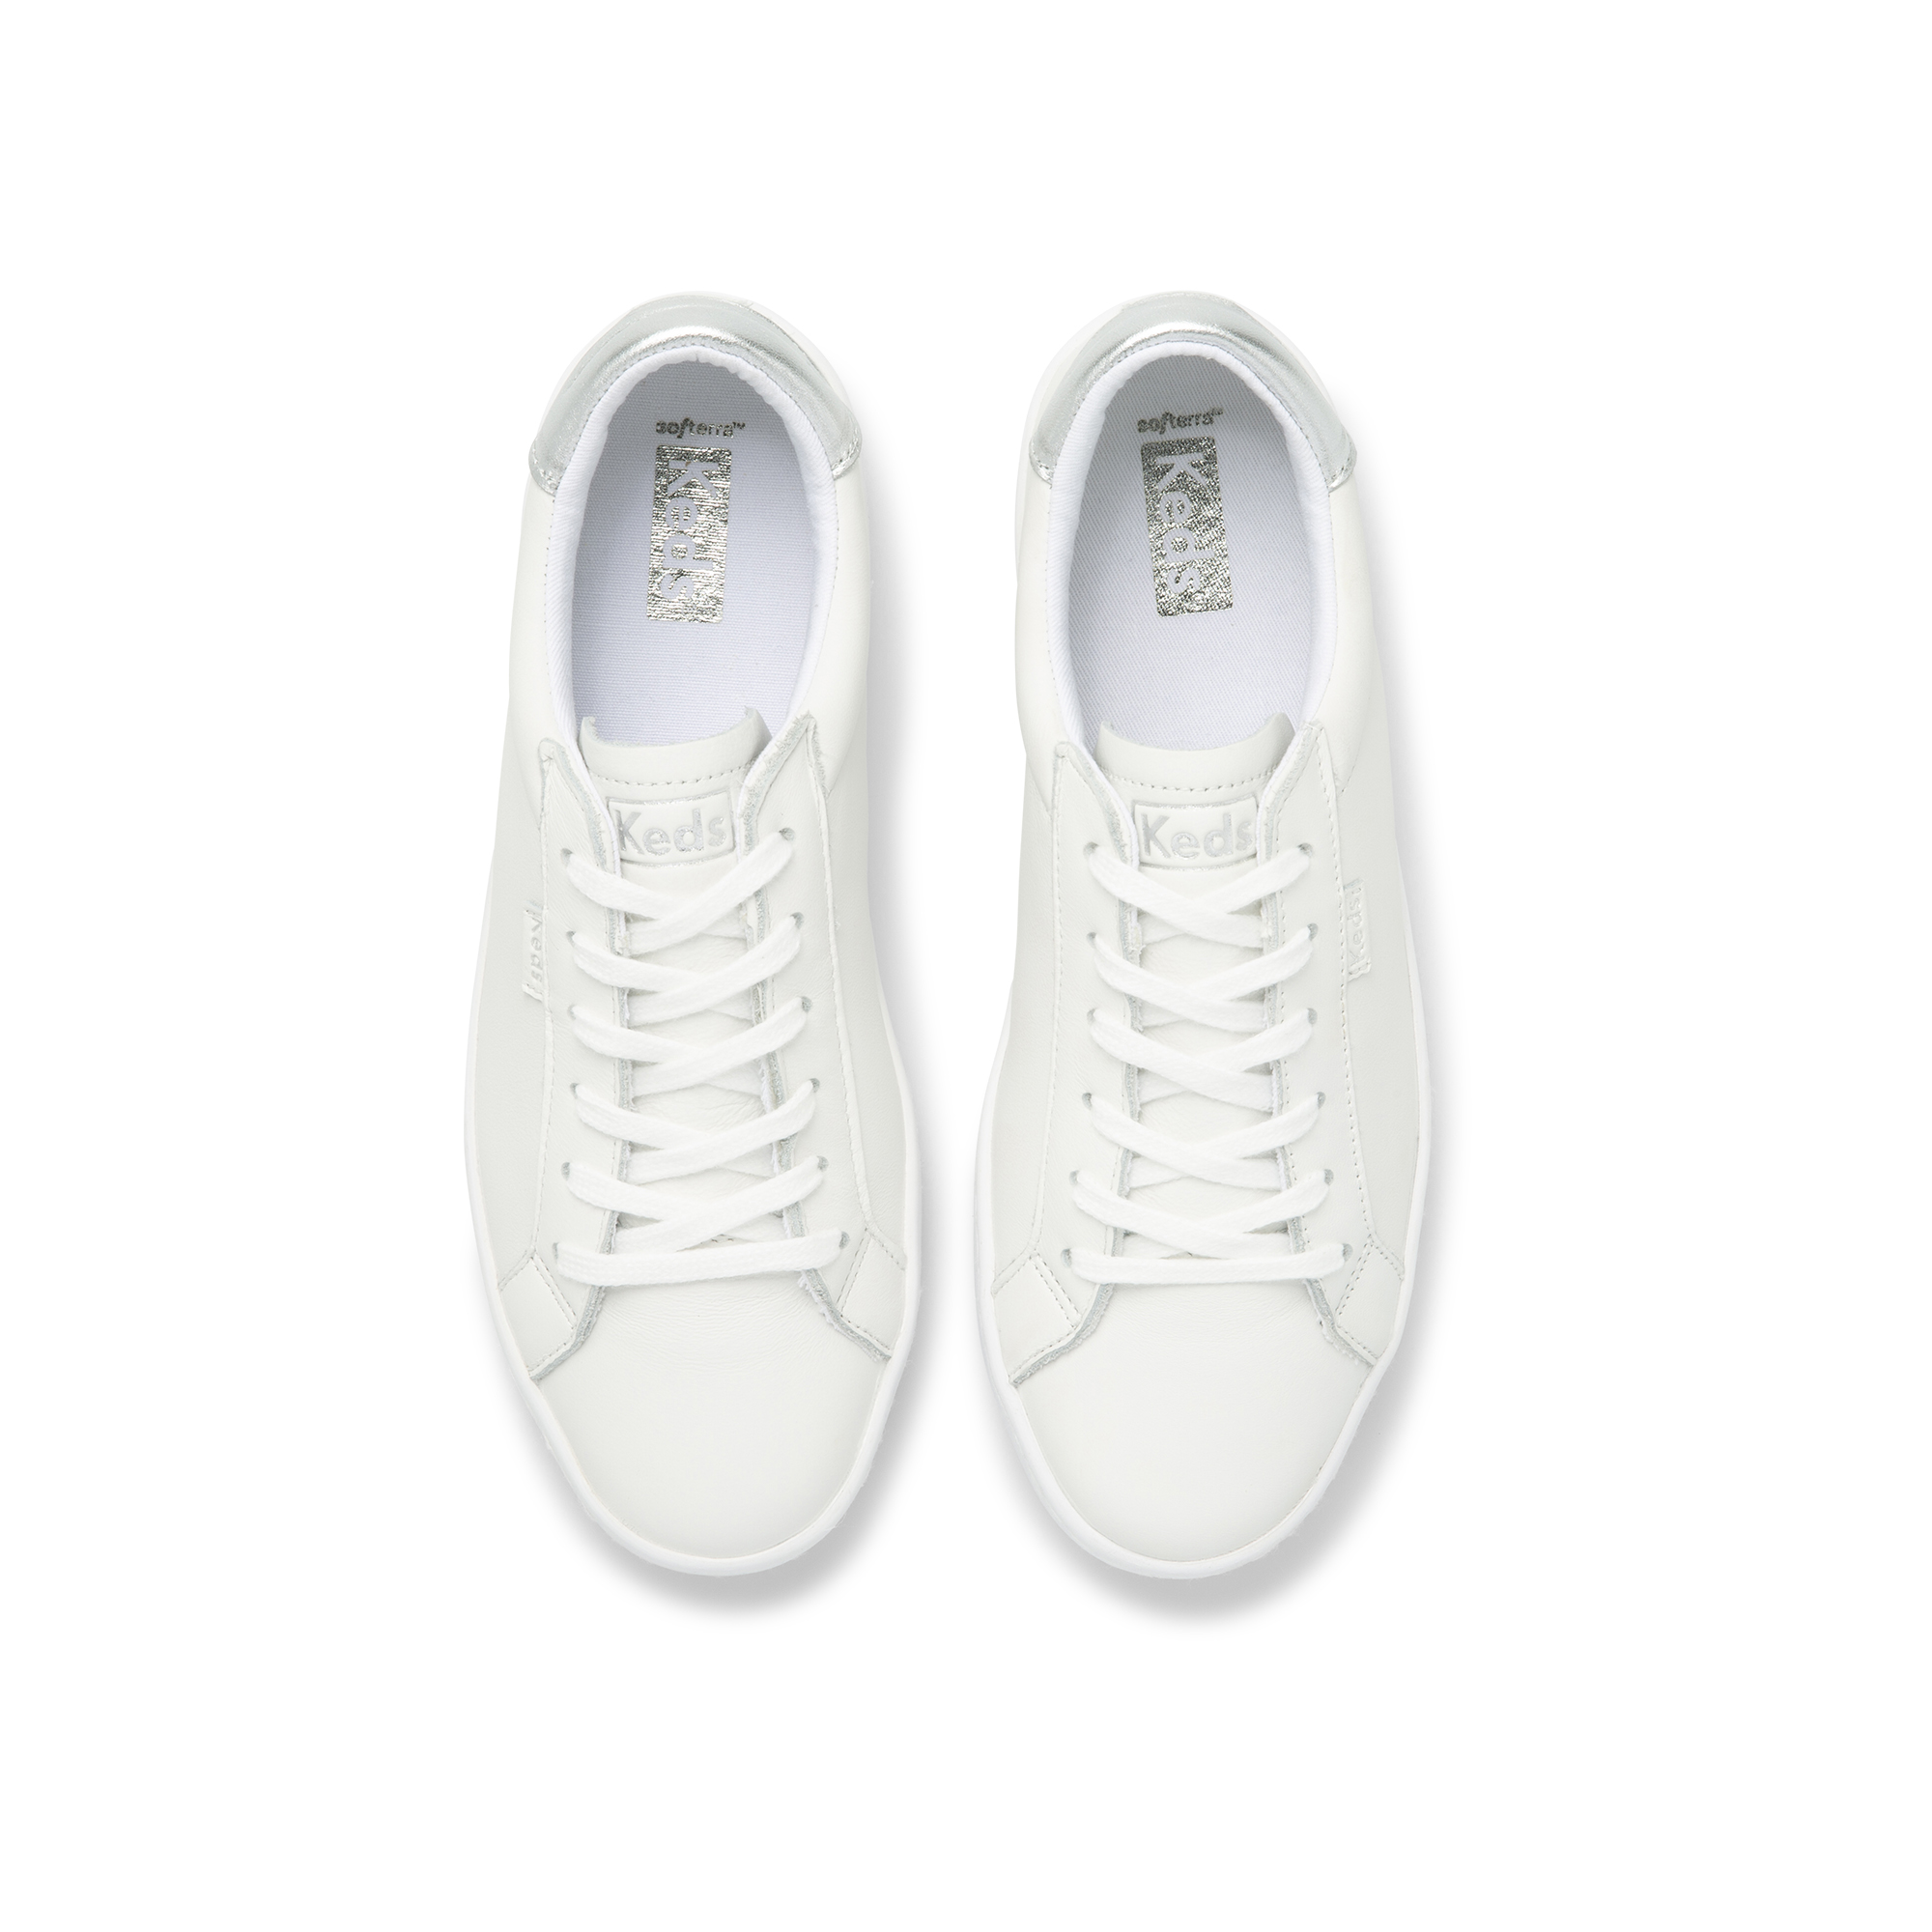 [NEW] Giày Keds Nữ- Ace Leather White Siliver- KD065949